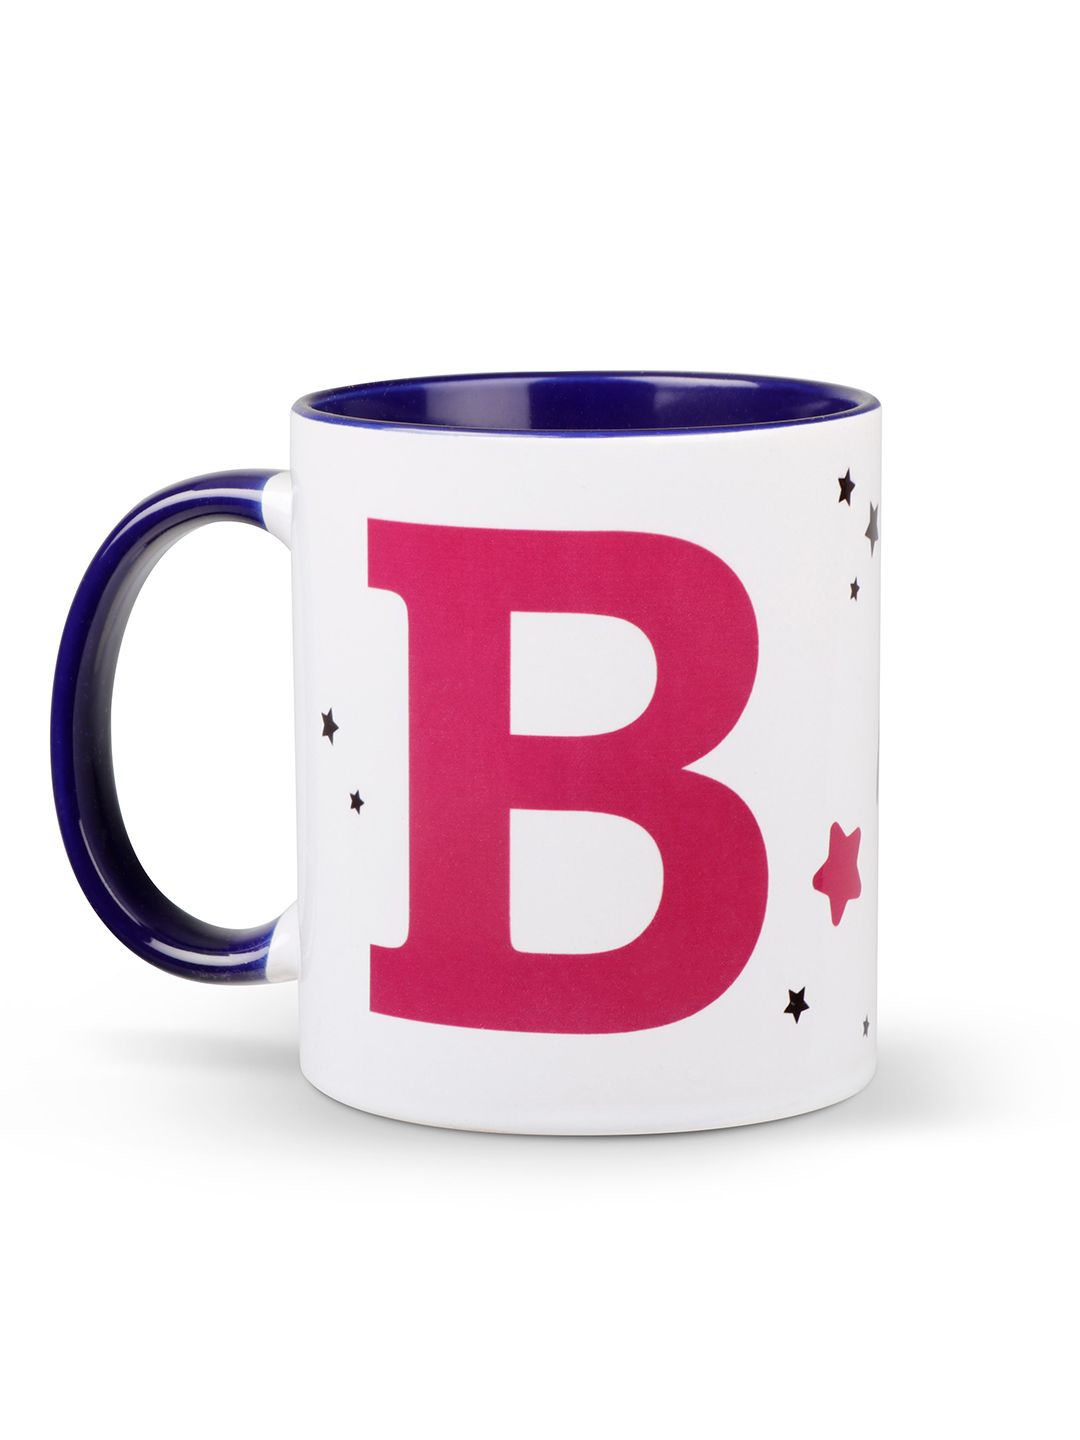 Archies White & Pink Printed Ceramic Glossy Mugs Set of Cups and Mugs Price in India